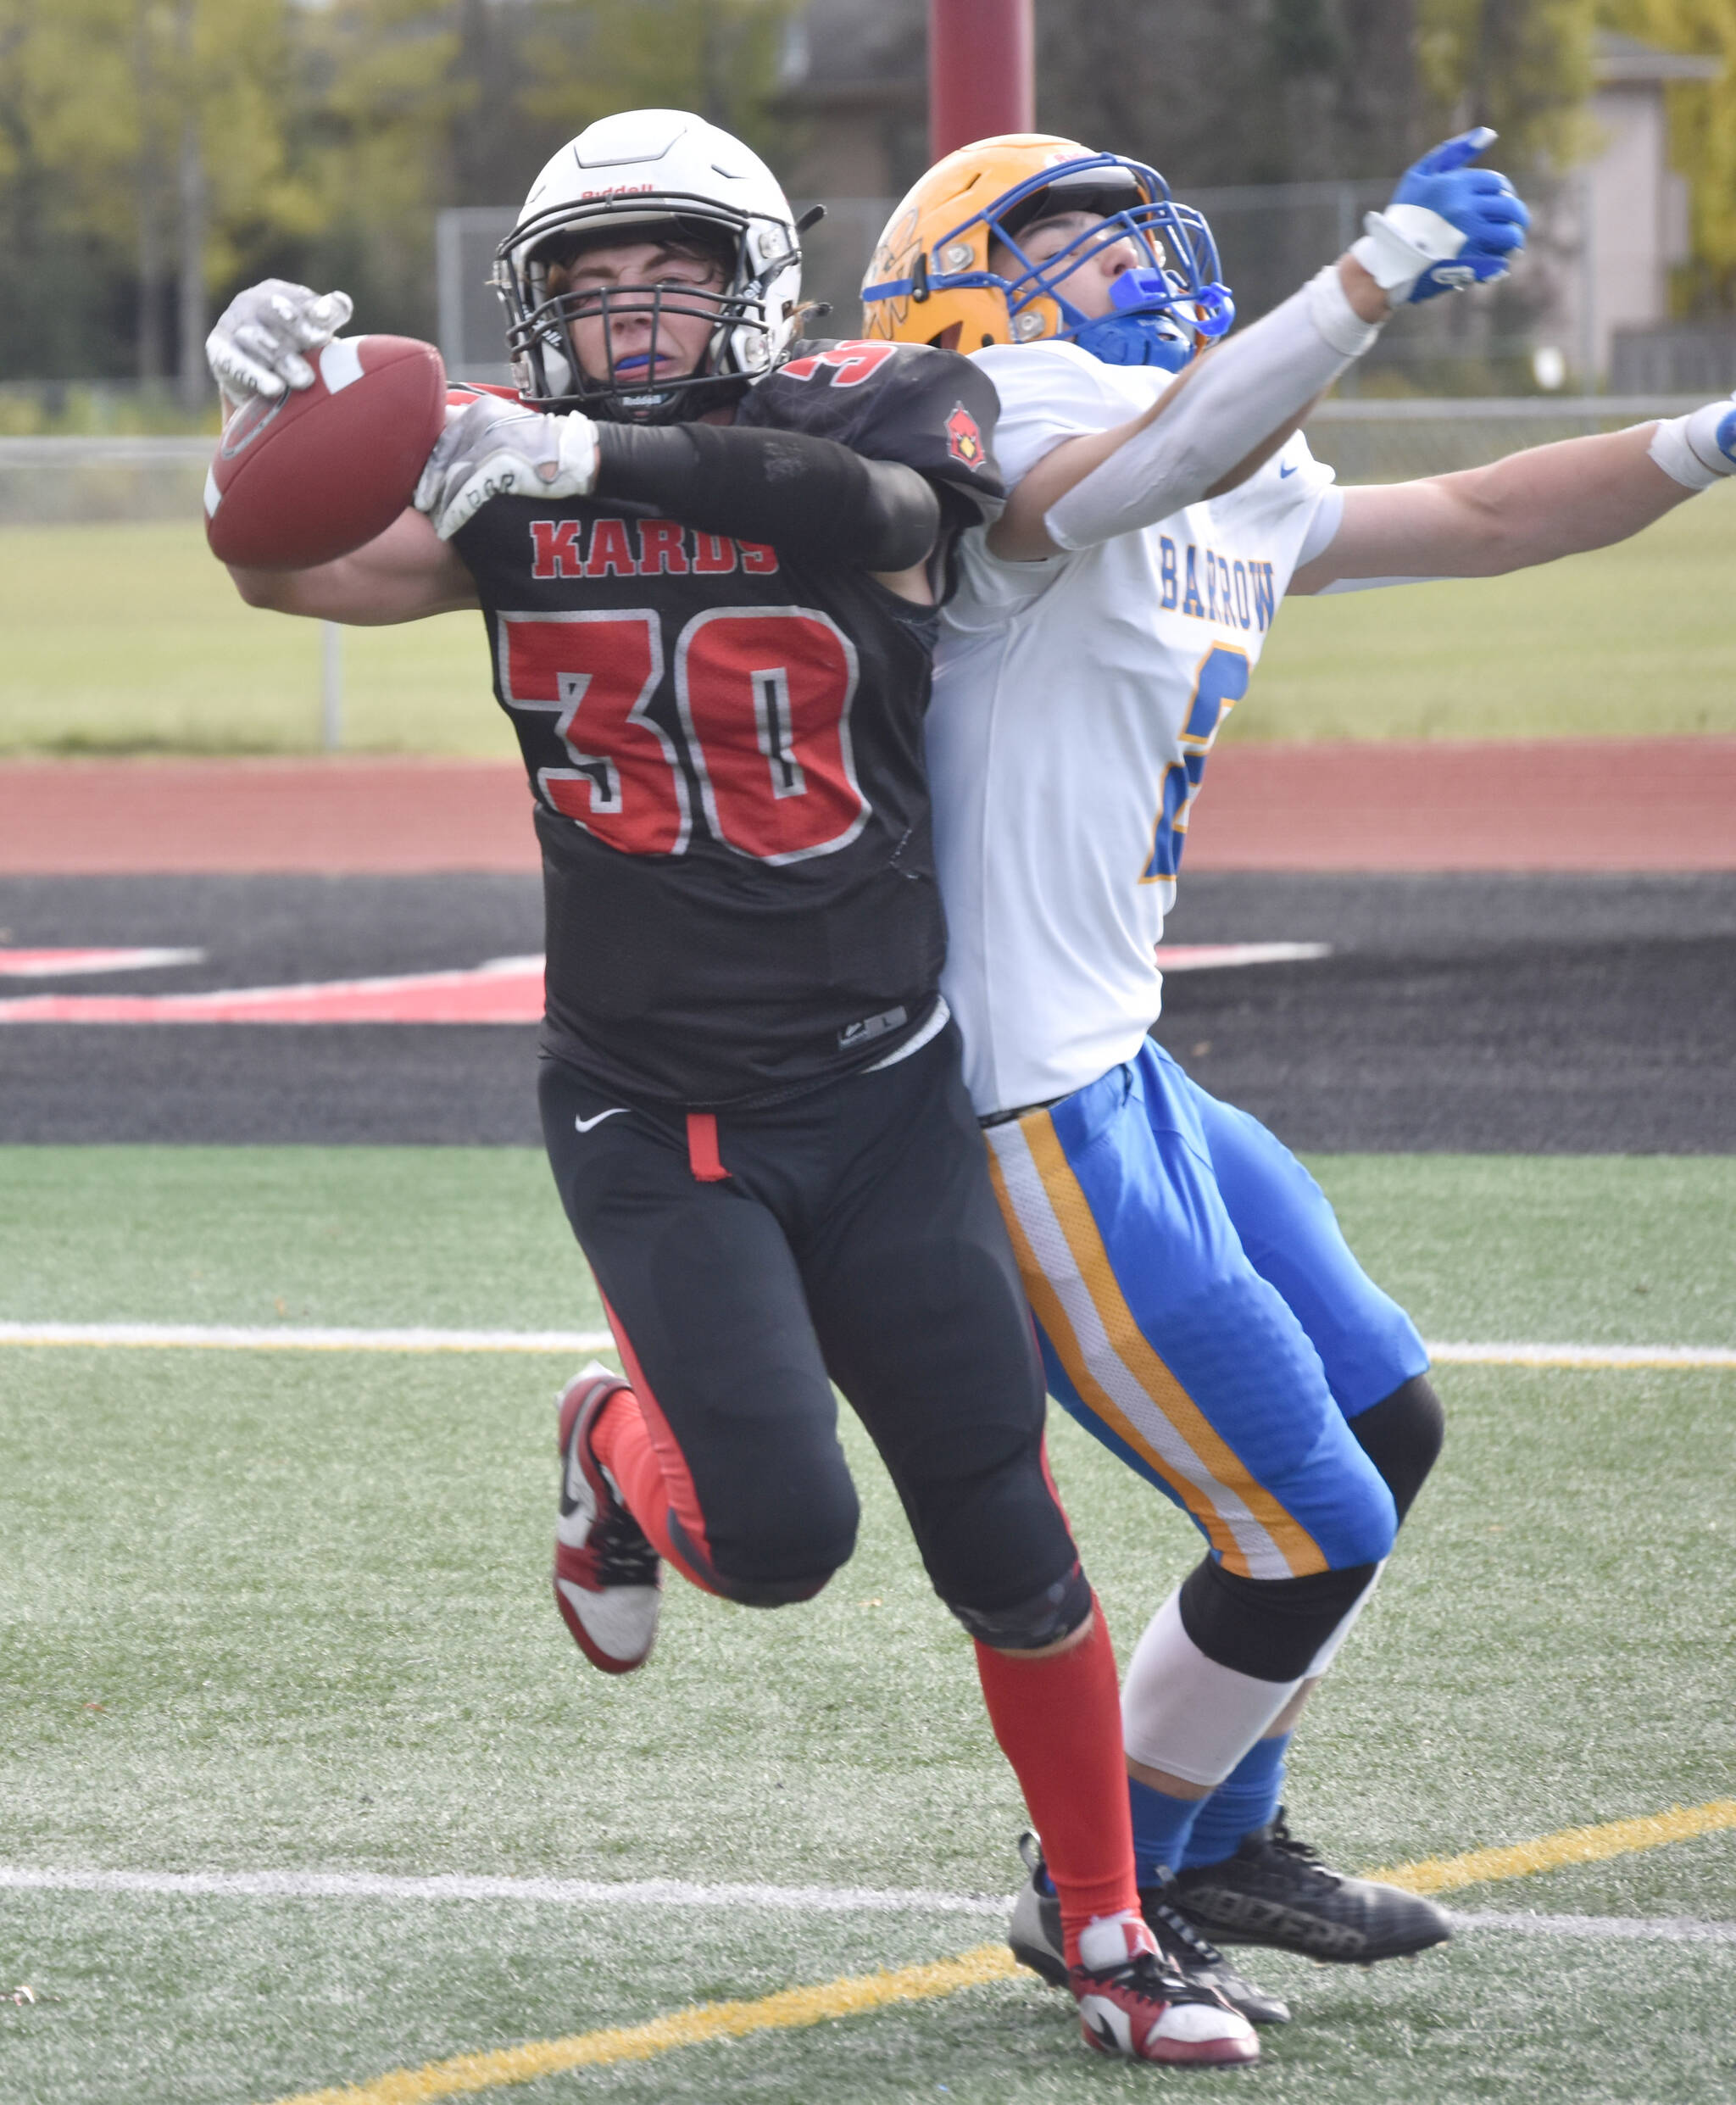 Kenai Central’s Cole Langham steps in front of Barrow’s Ethan Goodwin for an interception Saturday, Sept. 23, 2023, at Ed Hollier Field at Kenai Central High School in Kenai, Alaska. (Photo by Jeff Helminiak/Peninsula Clarion)